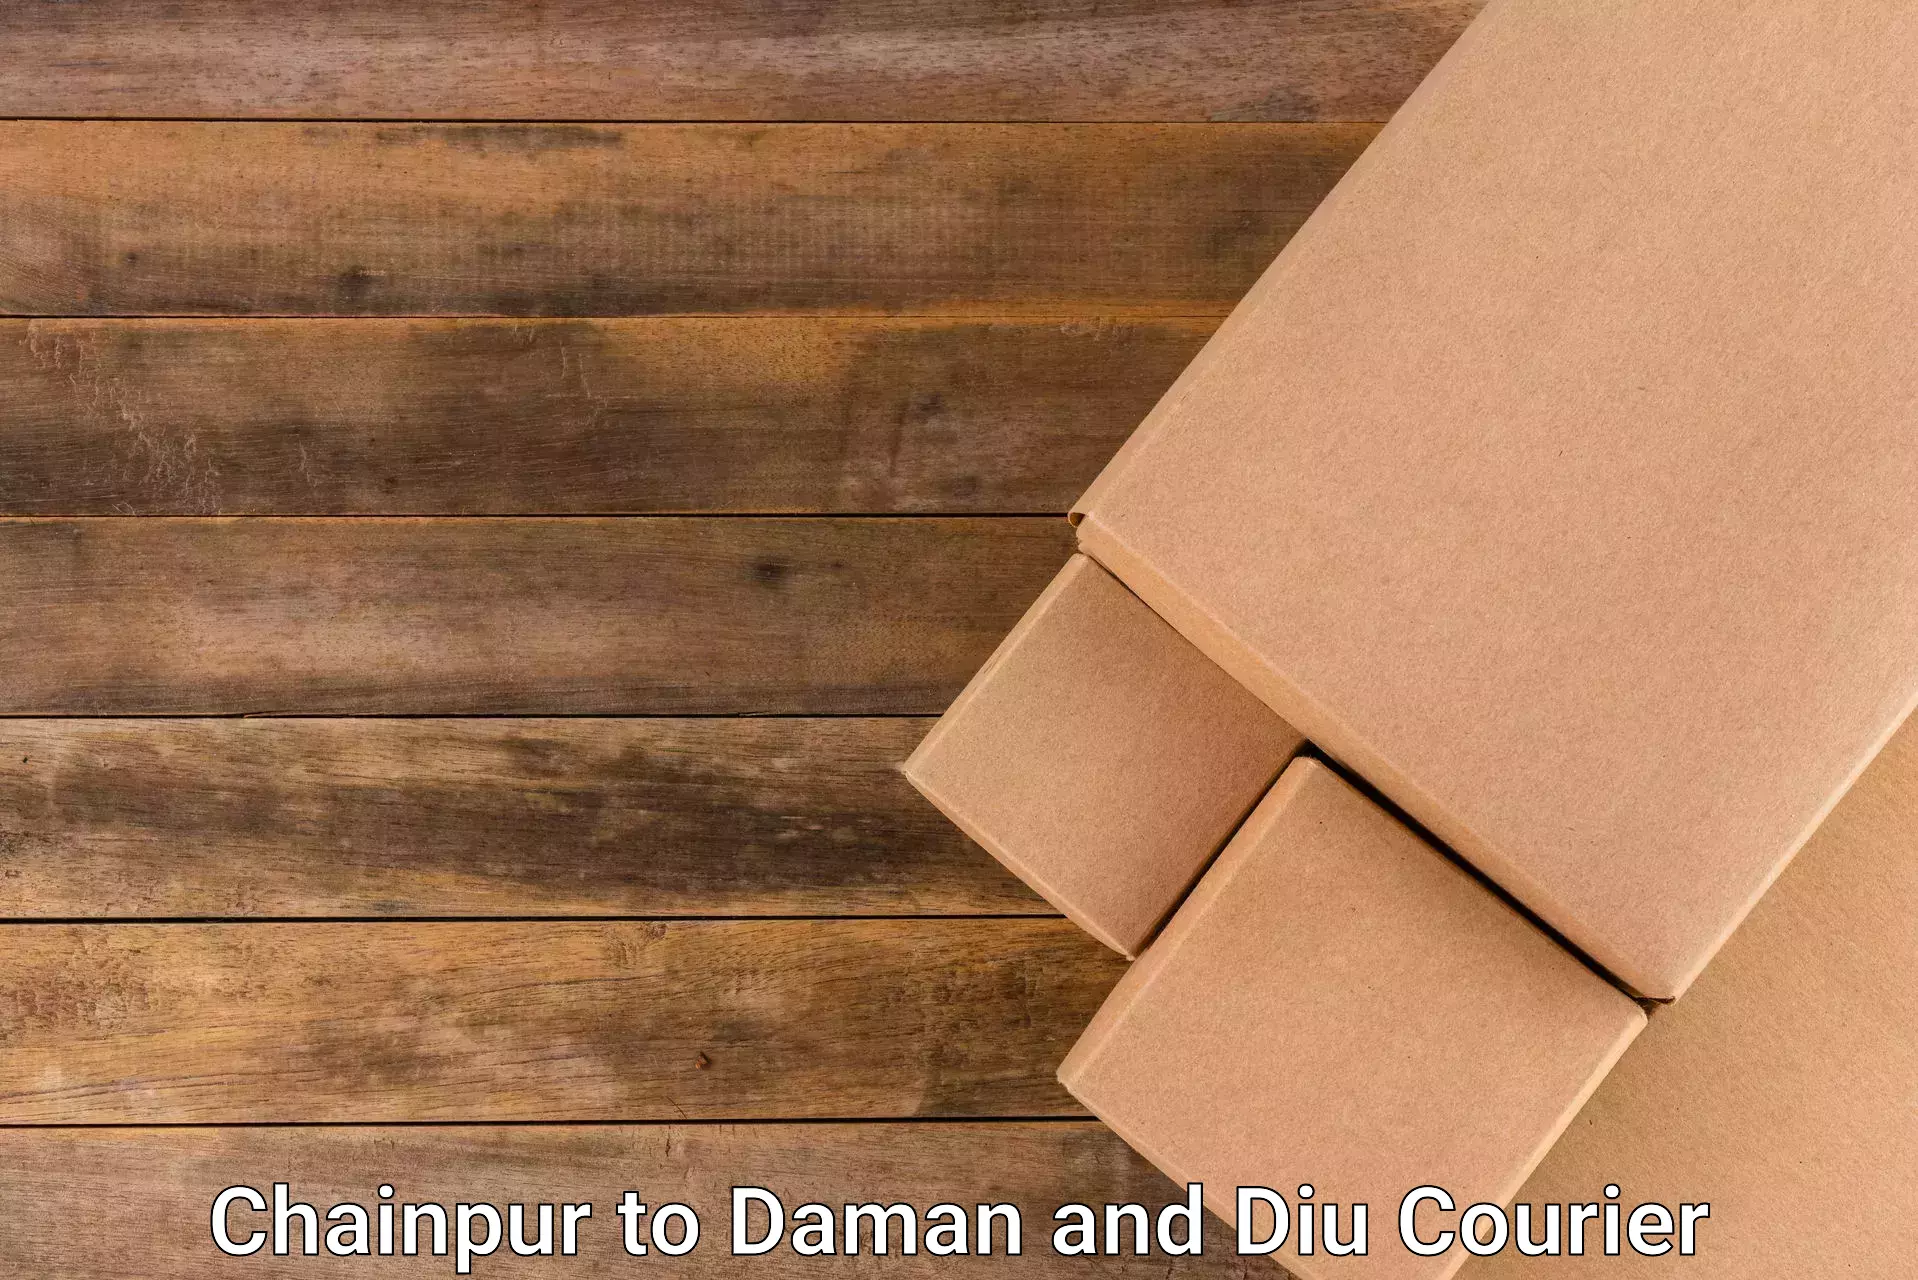 Integrated logistics solutions Chainpur to Diu